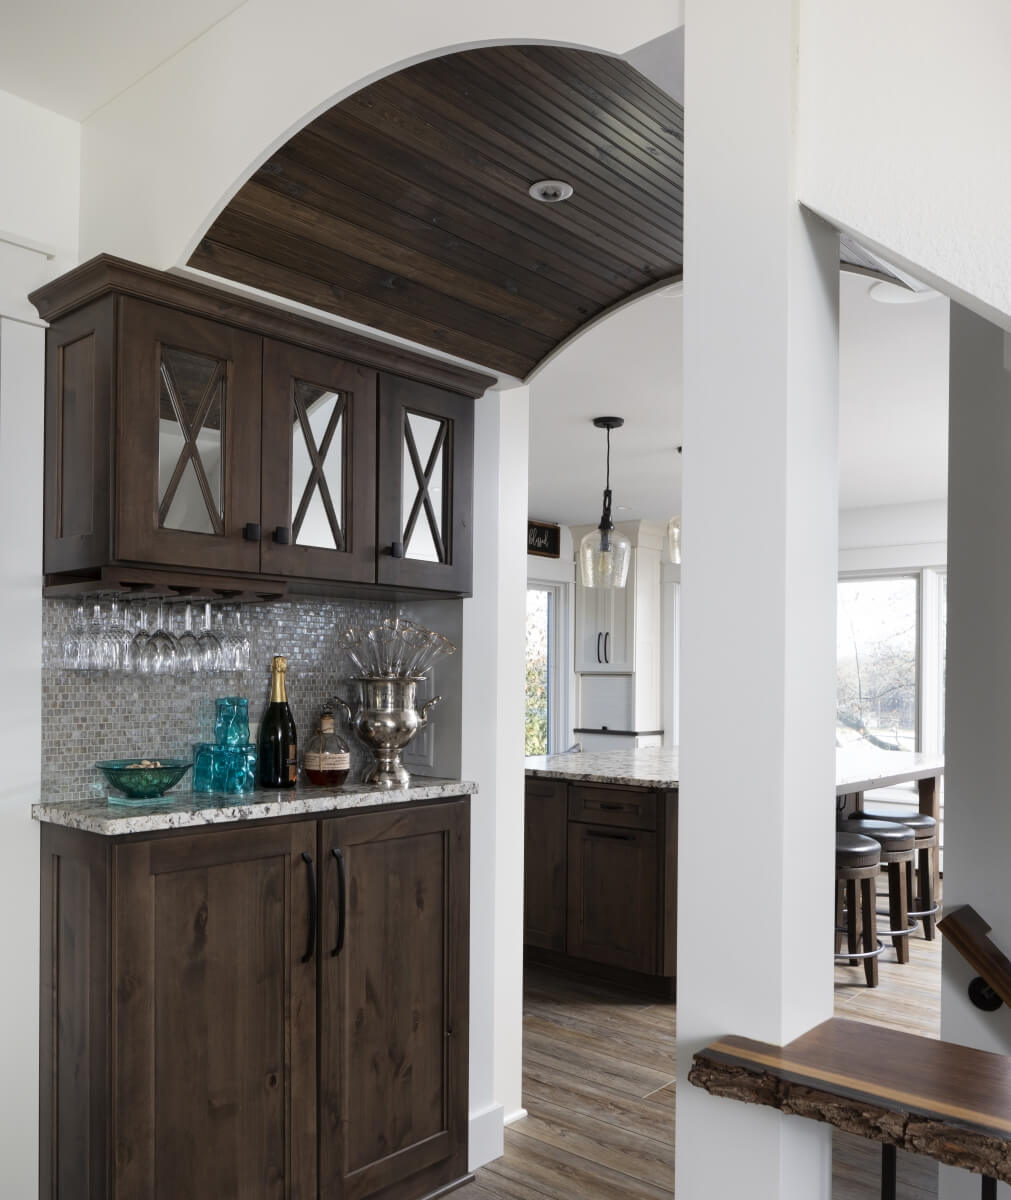 A beautiful hallway with a wet bar, mirrored cabinet inserts, and a barrel ceiling design.